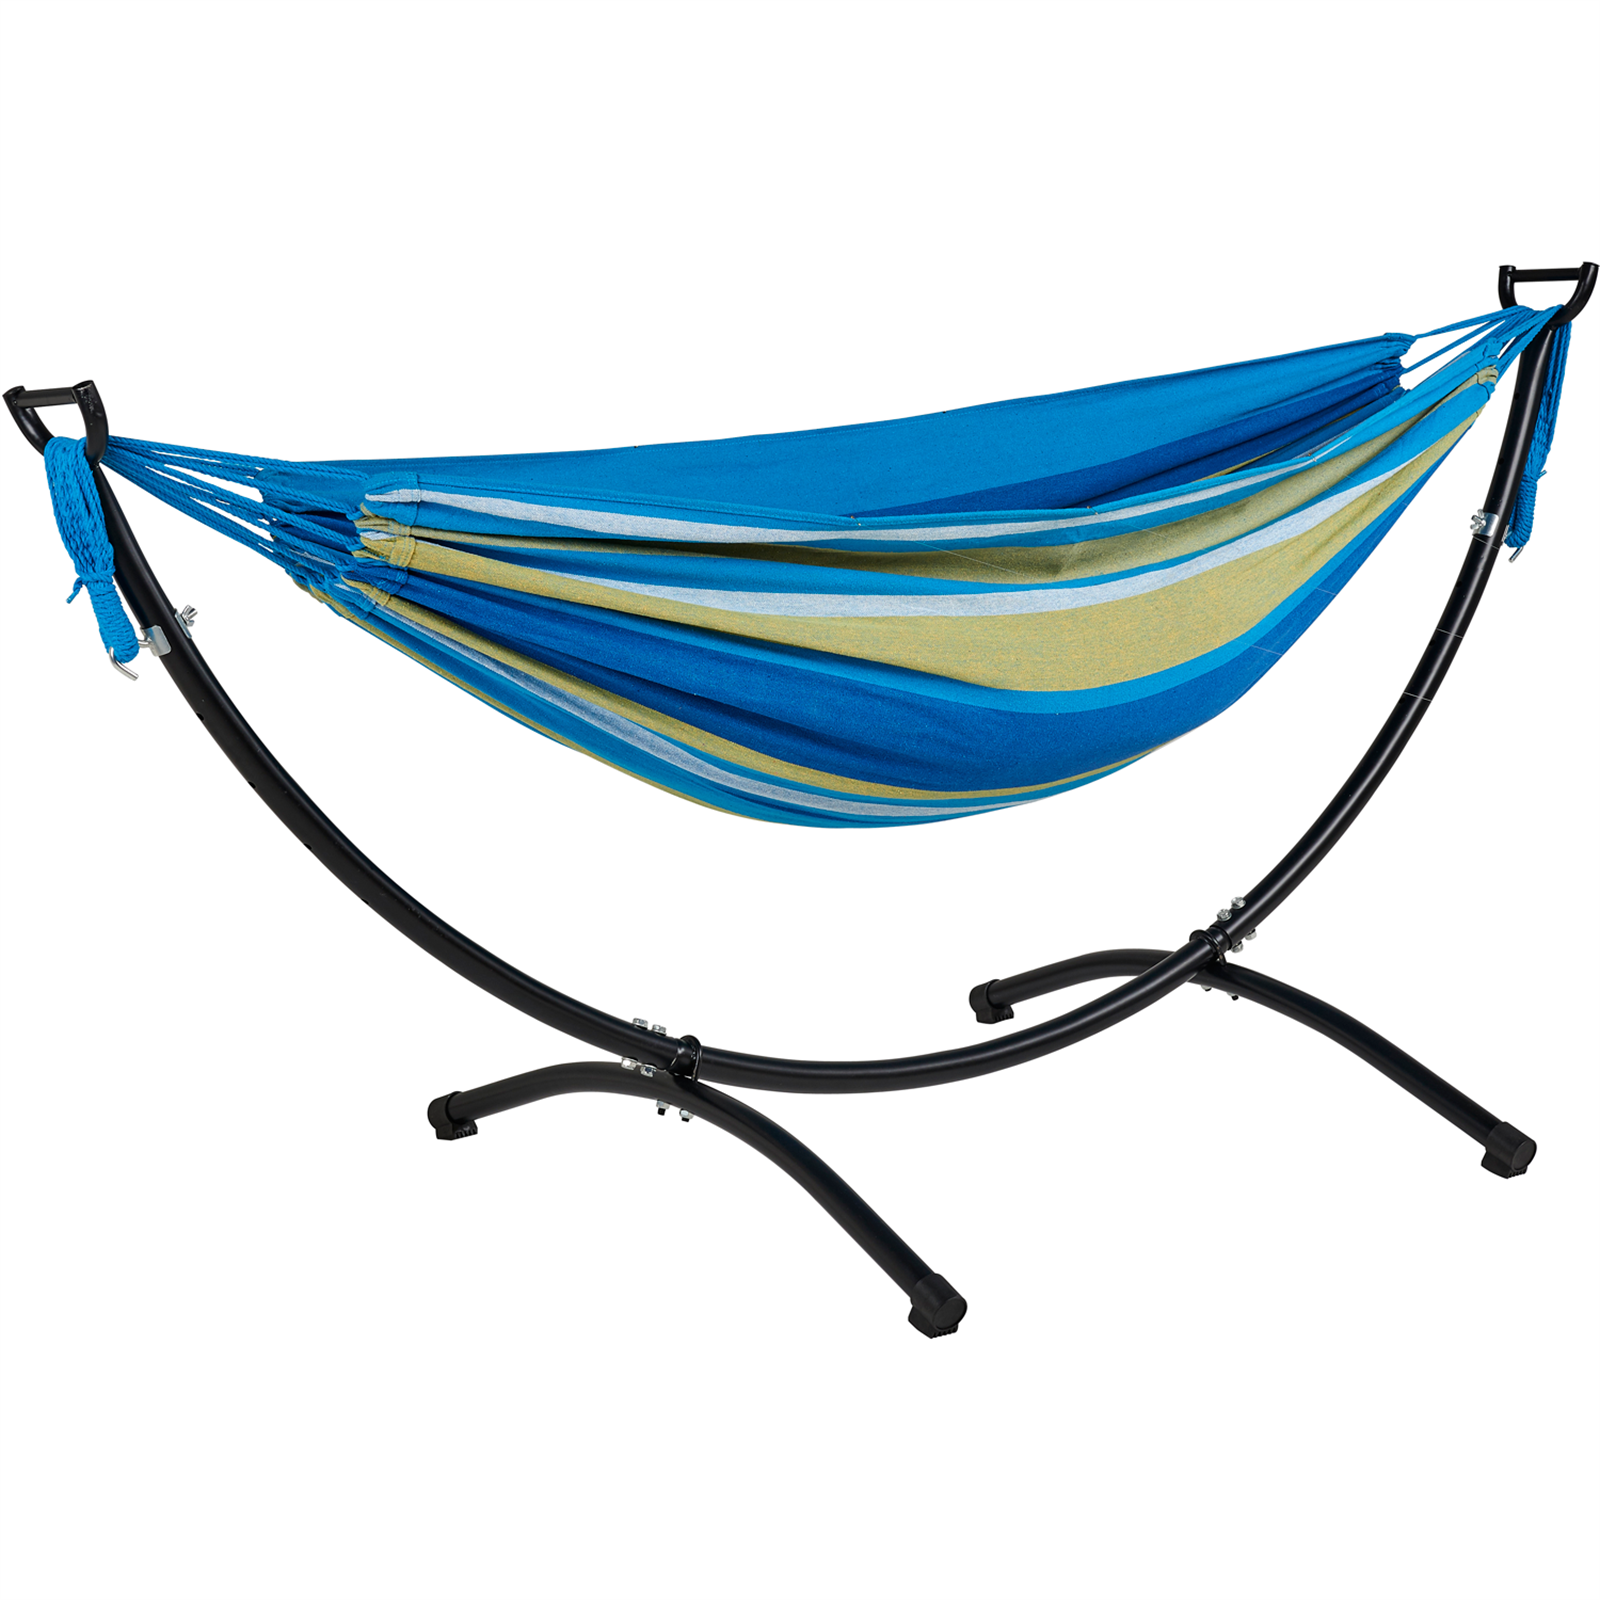 OZtrail Double Hammock with Frame